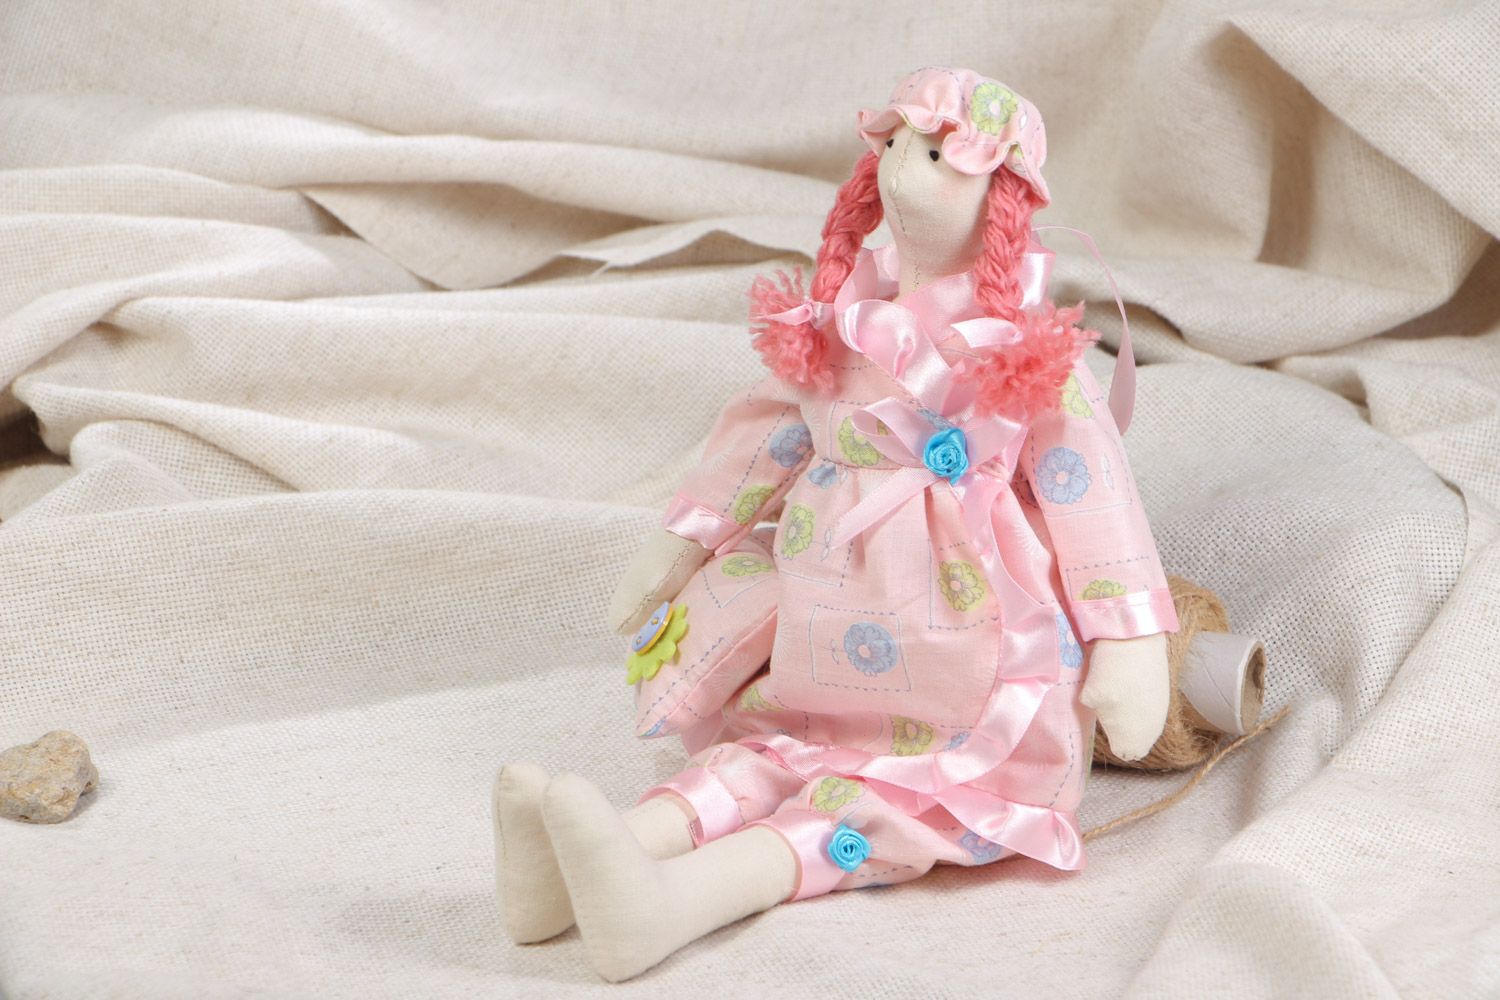 Nice handmade collectible fabric soft doll for children and home decor Sleepy photo 1